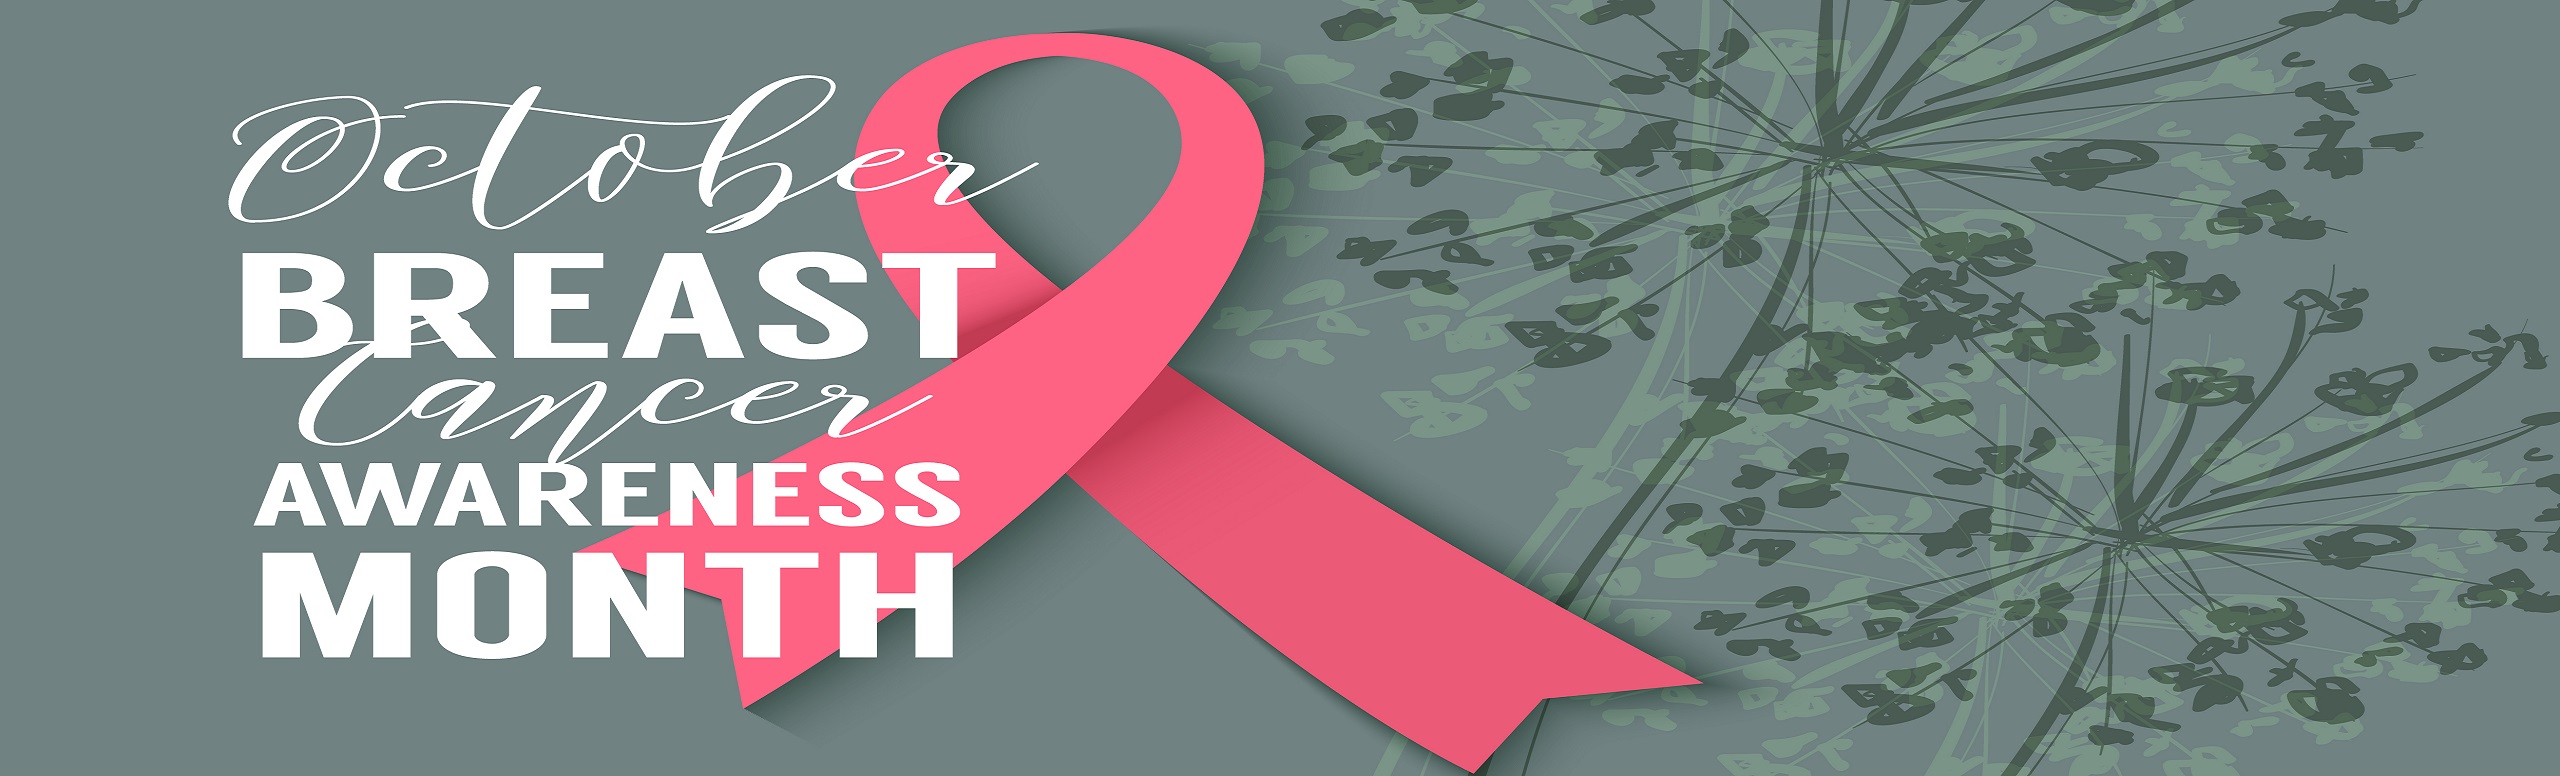 Banner picture of a ribbon. Banner says: 
October BREAST Cancer Awareness MONTH